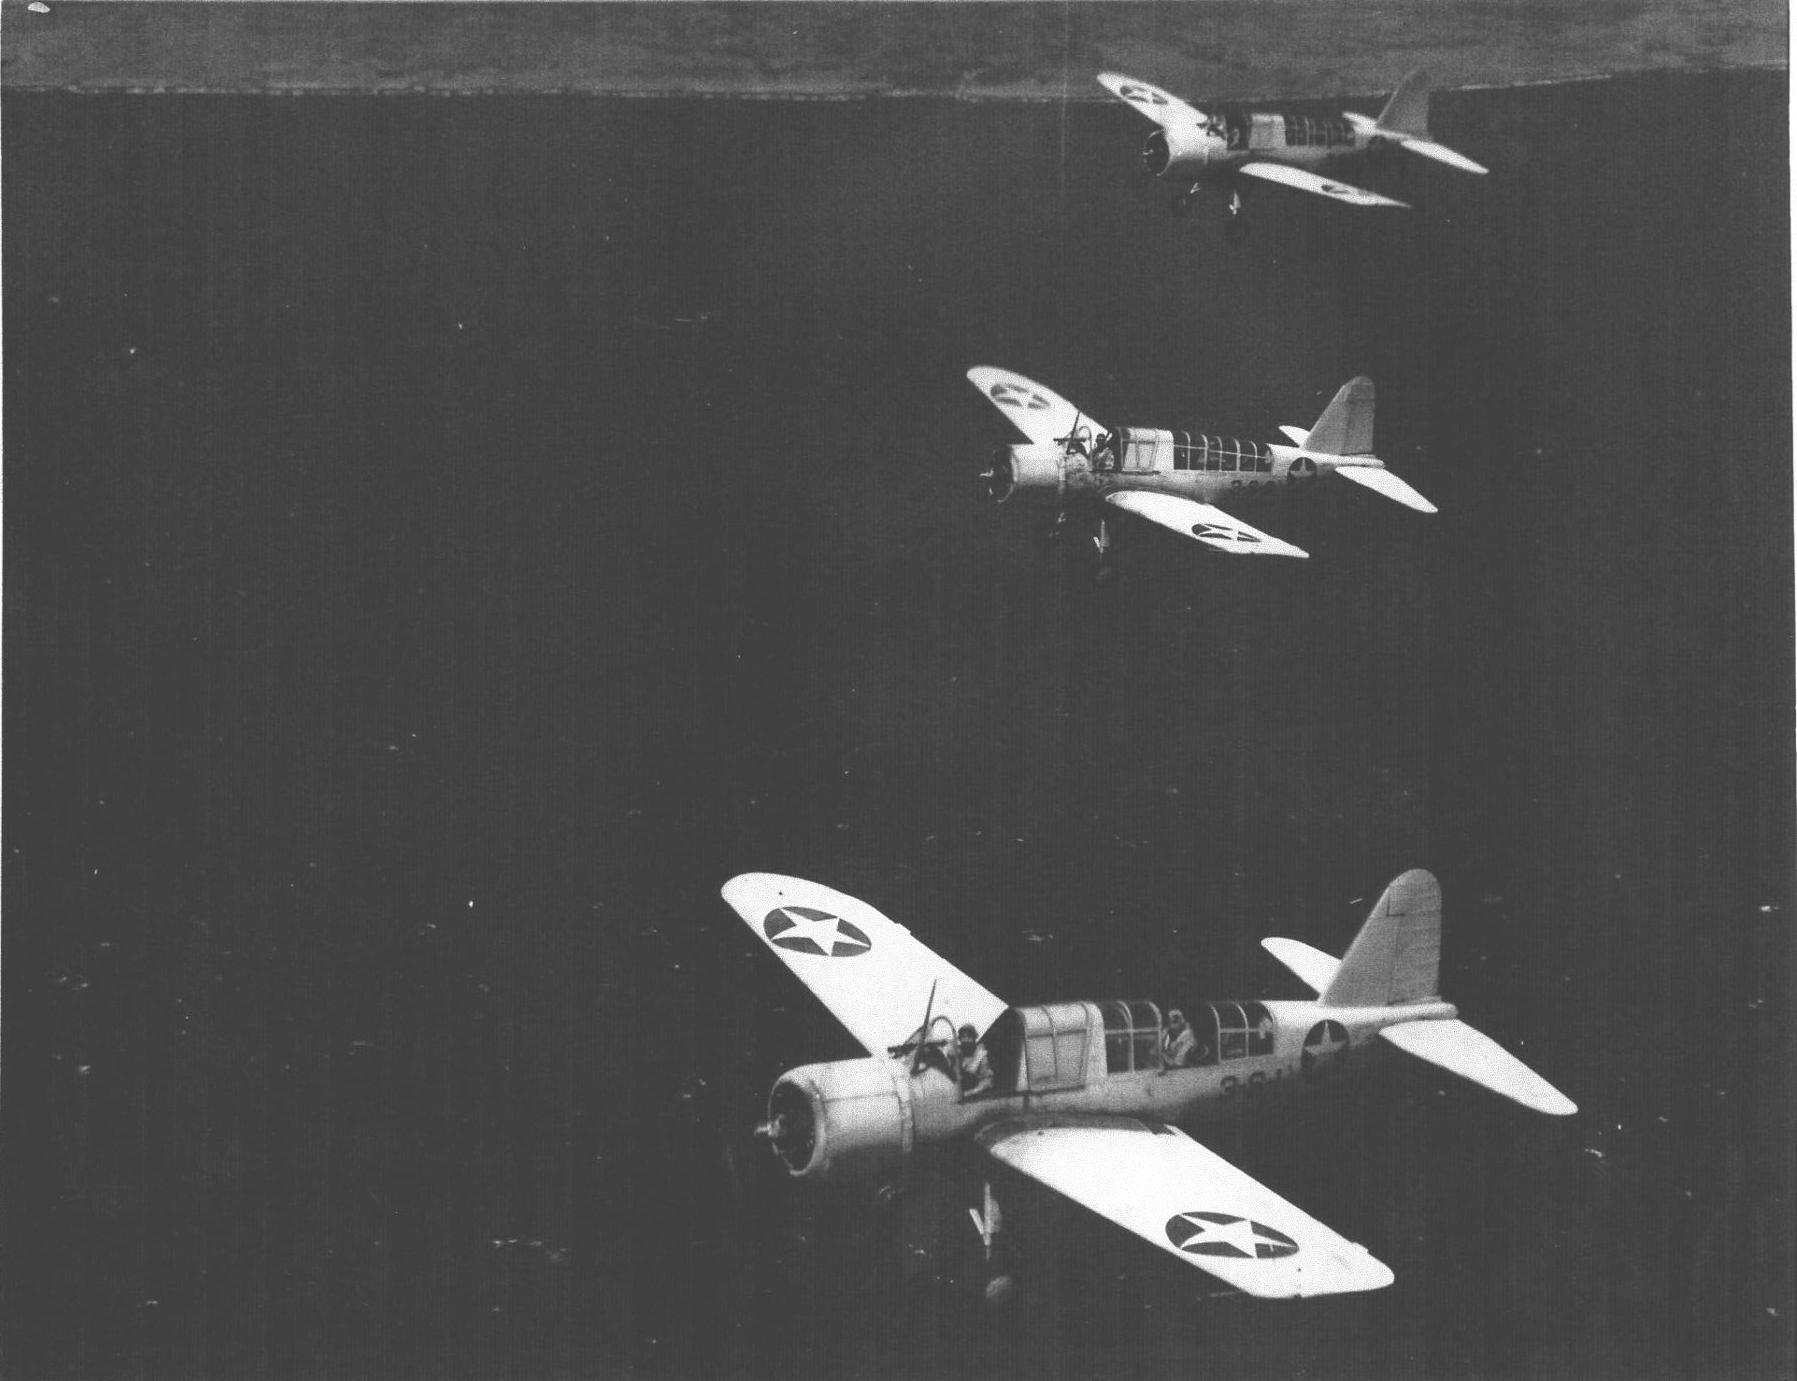 Land-variant OS2U Kingfisher aircraft of US Navy Scouting Squadron 44 flying convoy protection and anti-submarine patrols, Hato Field, Curaçao, Dutch West Indies, 2 Nov 1942-1 Feb 1943, photo 3 of 3